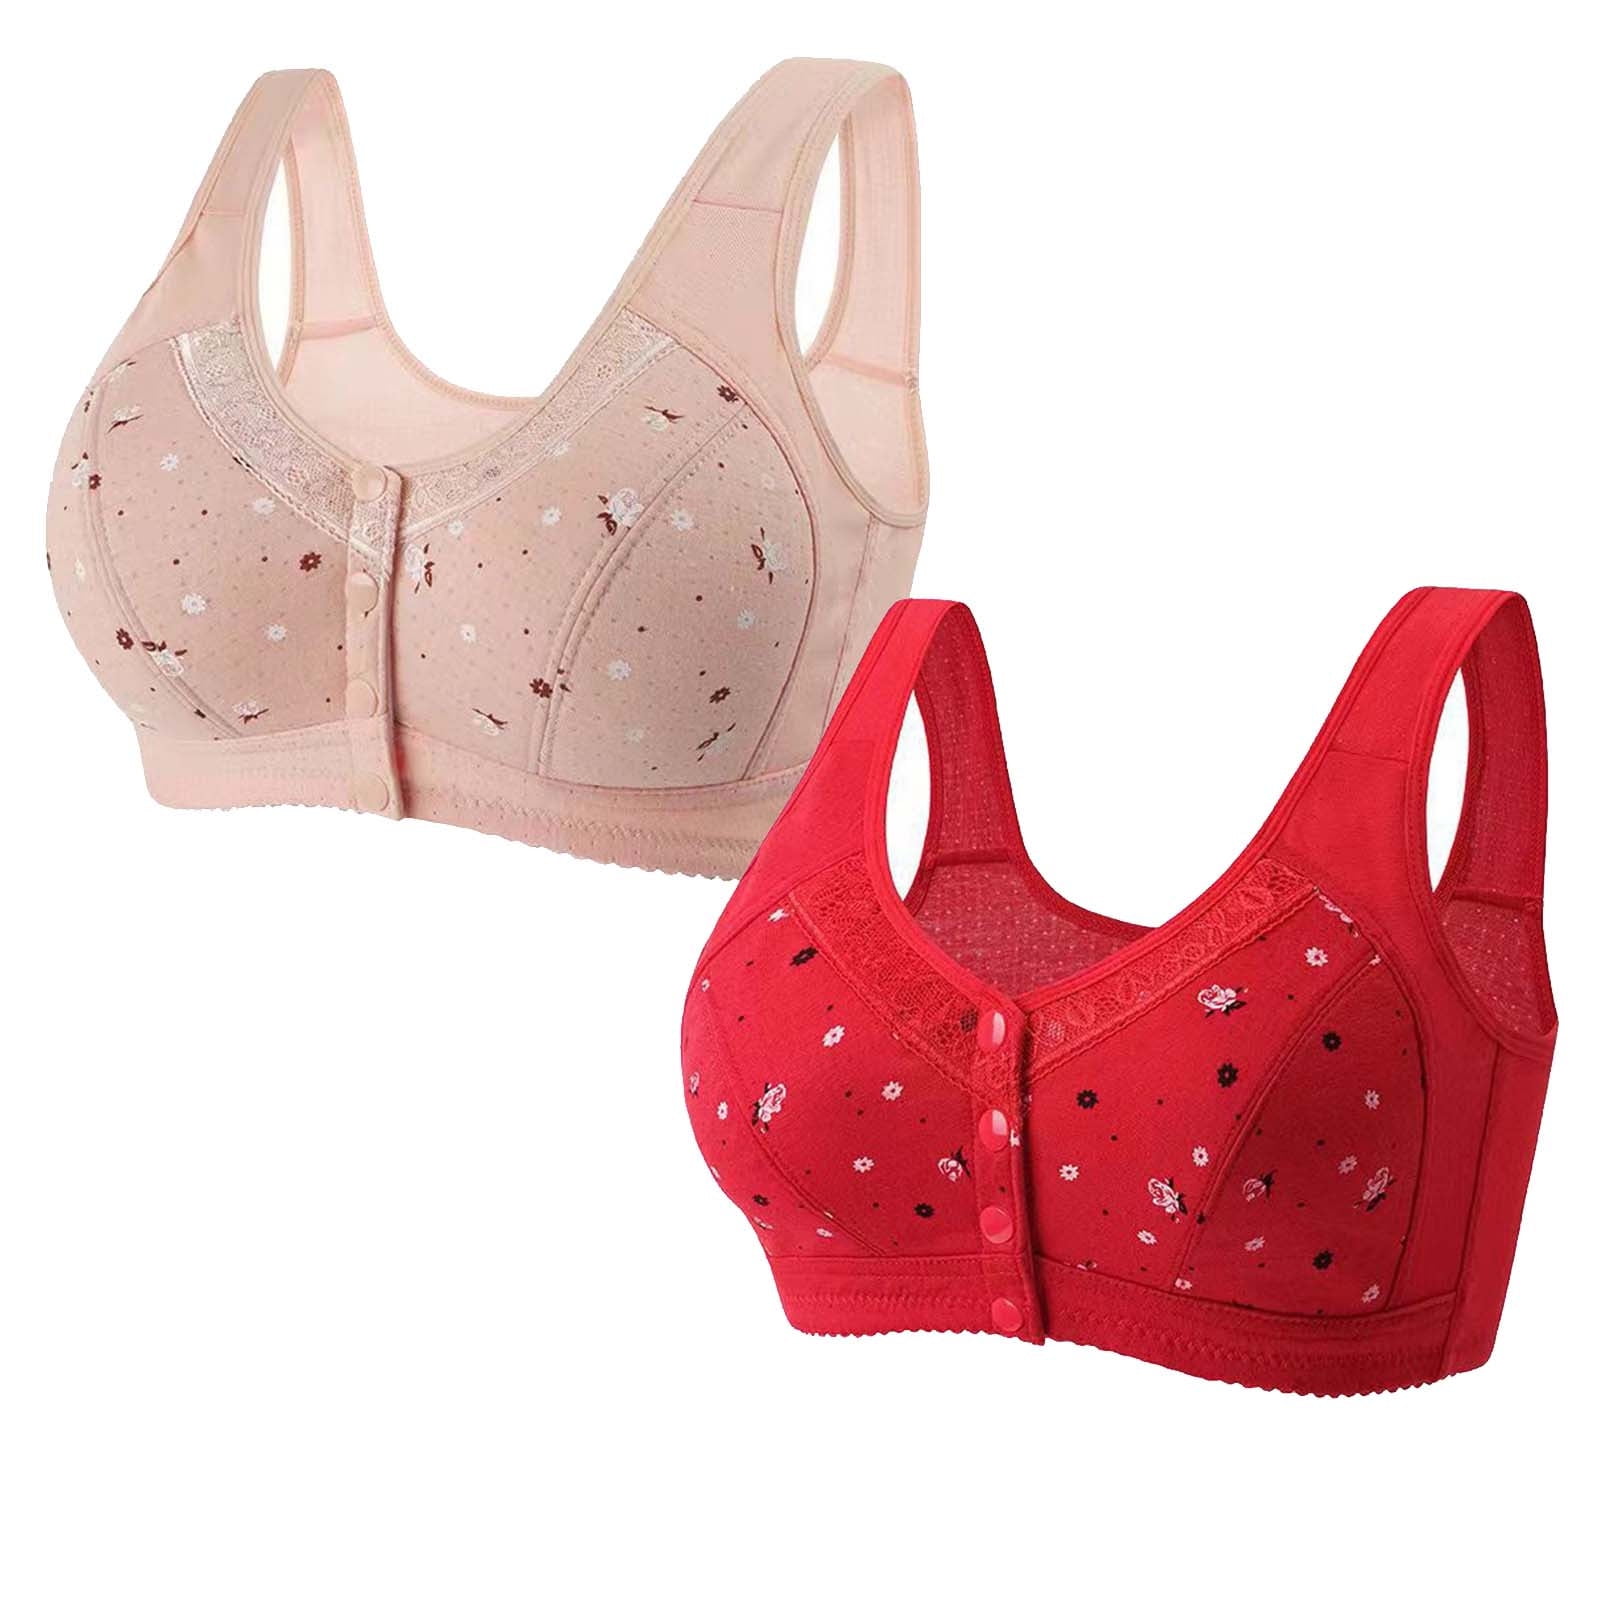 Mrat Clearance Push up Bras for Women Sports High Support Lace